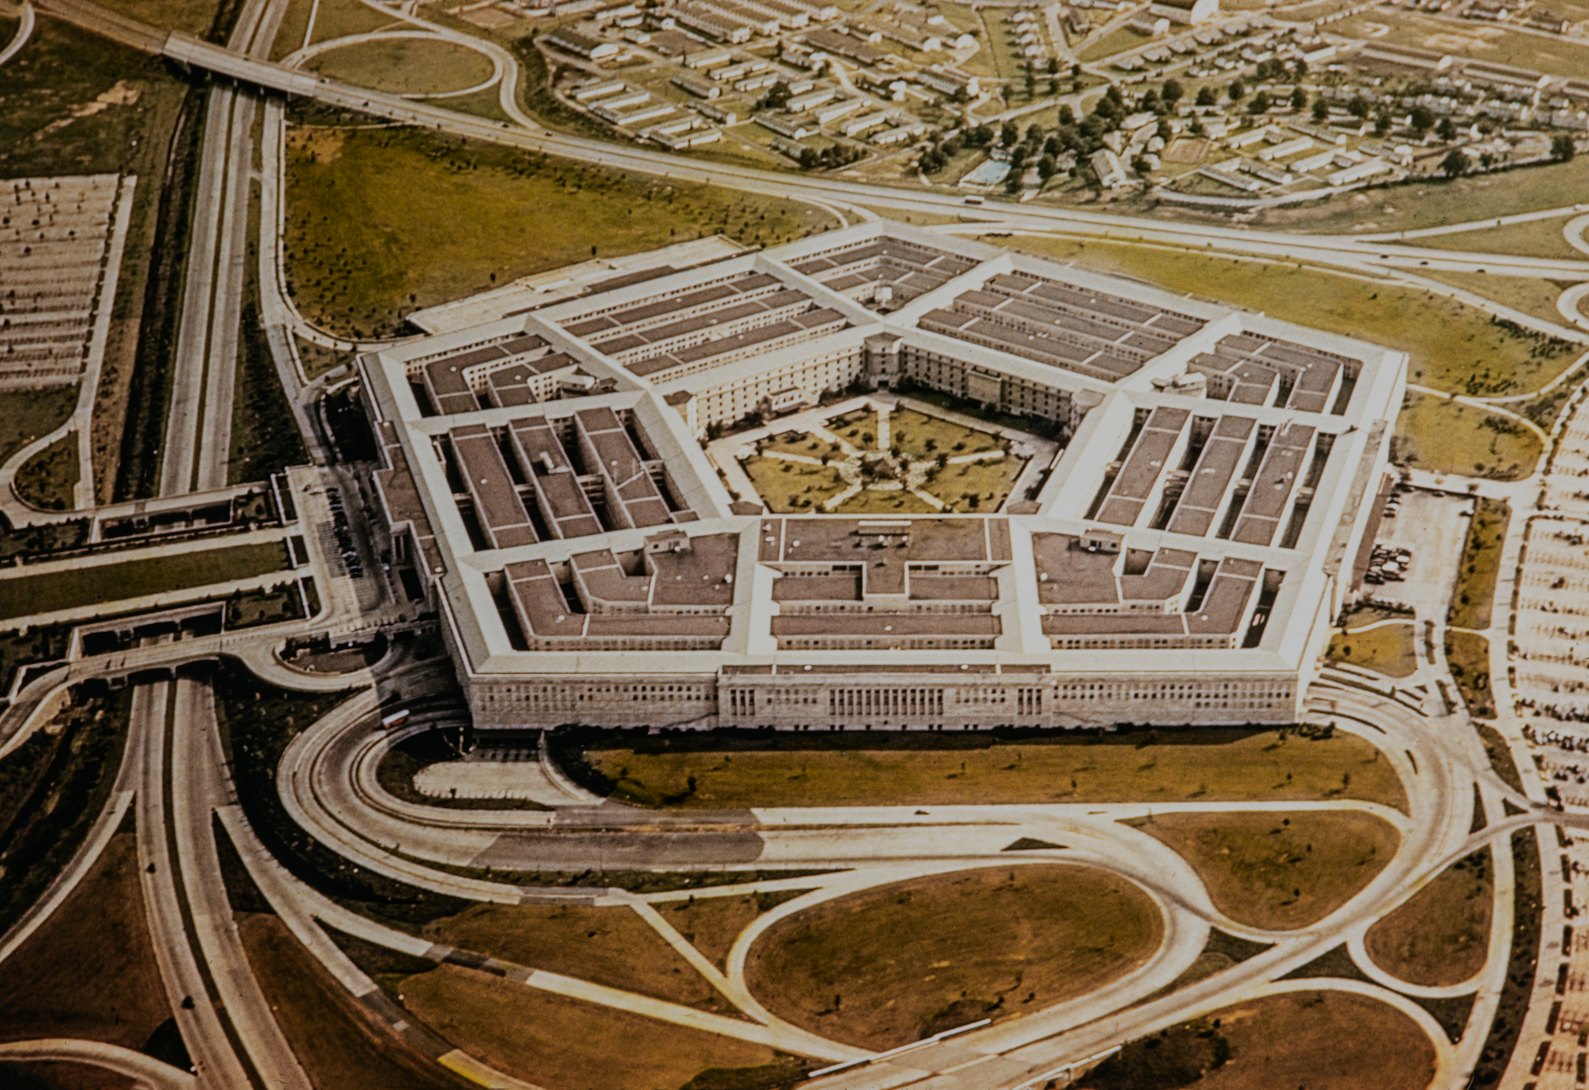 Washington during the 1950's. The United States Department of Defense is an executive branch department of the federal government charged with coordinating and supervising all agencies and functions of the government directly related to national security and the United States Armed Forces. Aerial of the Pentagon, the Department of Defense headquarters in Arlington, Virginia, near Washington DC, with I-395 freeway on the left, and the Air Force Memorial up middle.